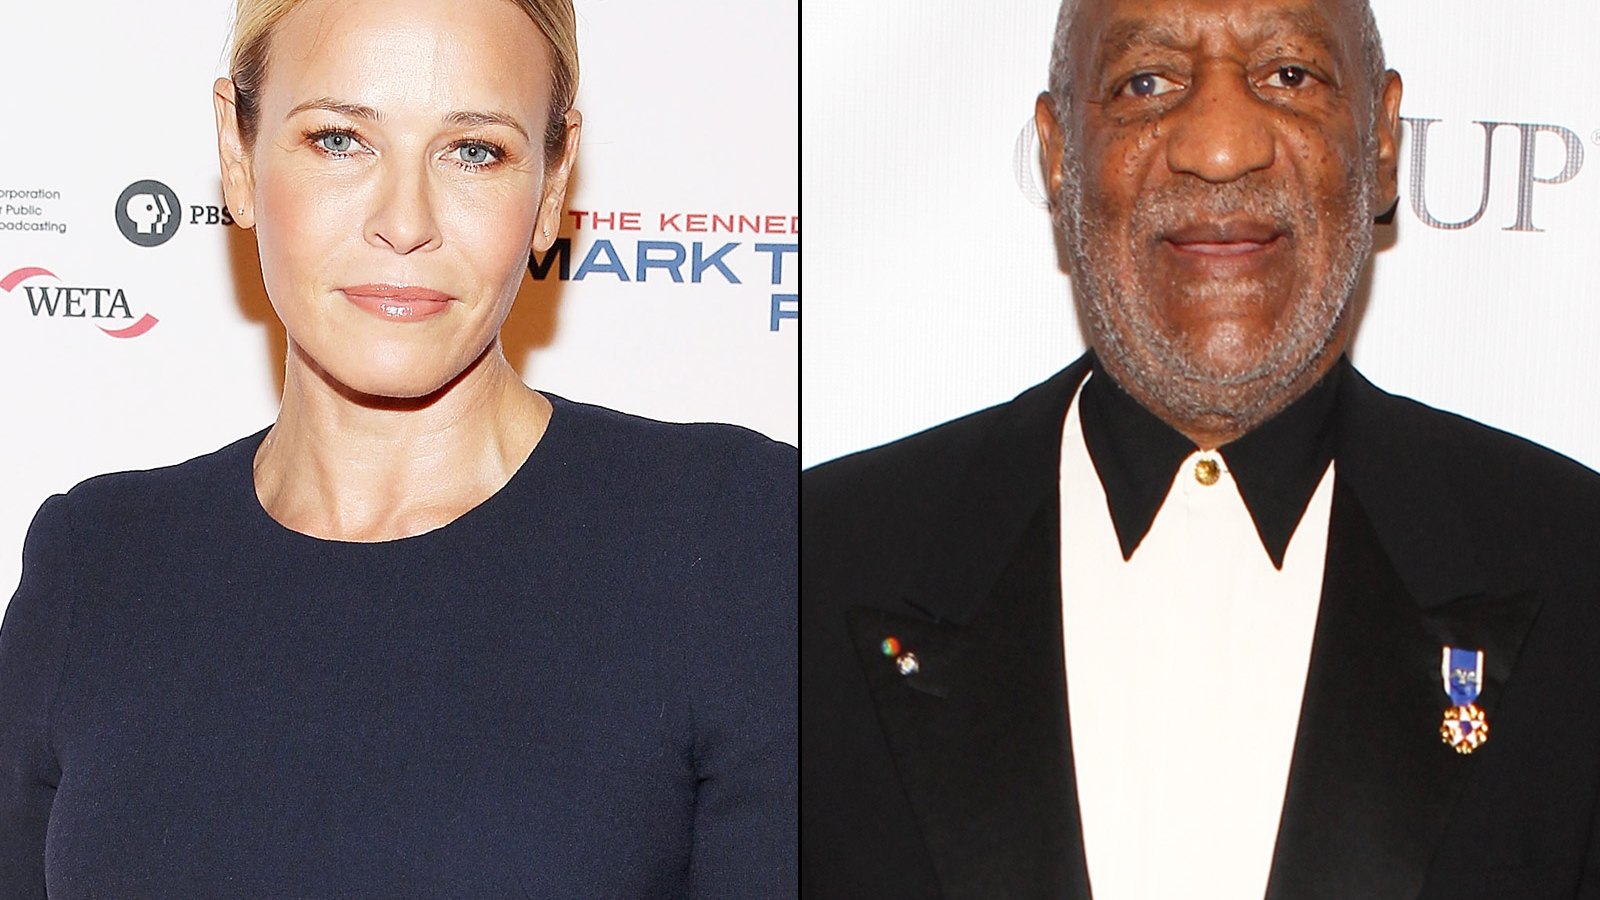 Chelsea Handler and Bill Cosby